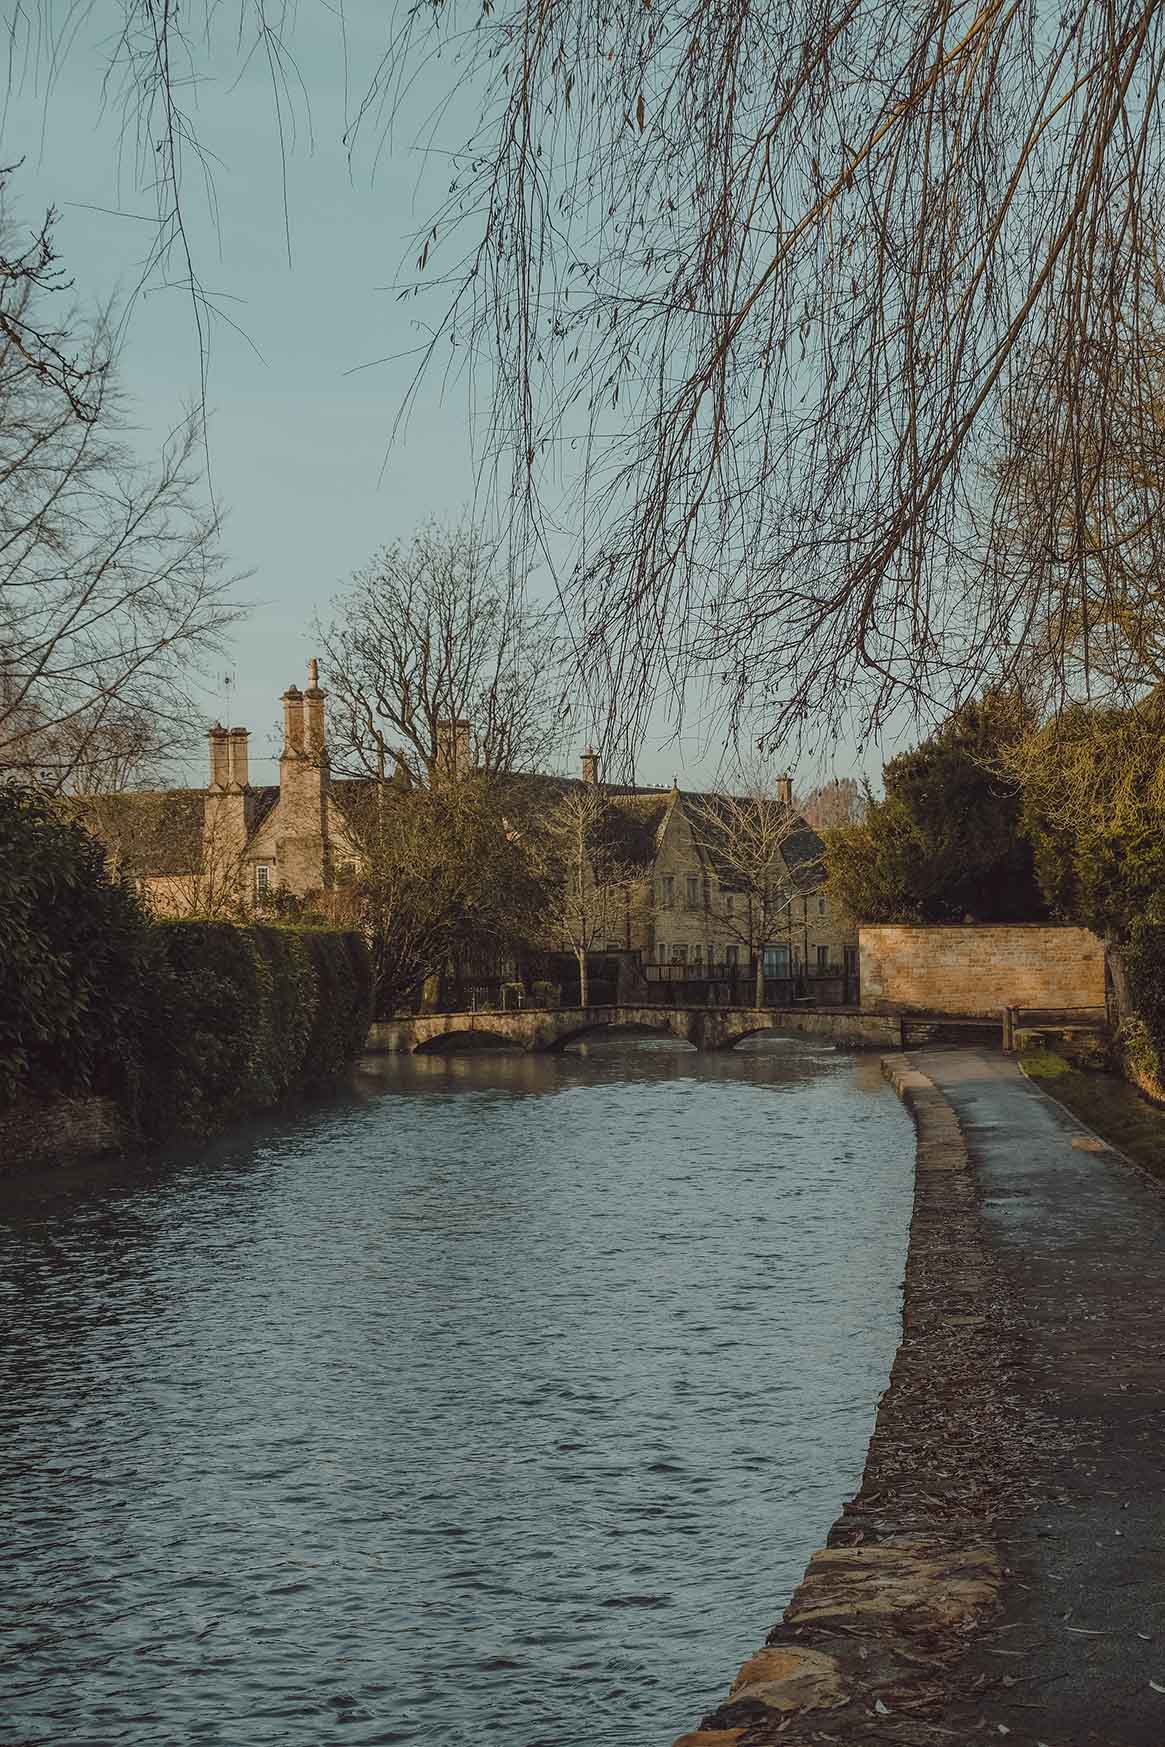 A waterside view of Bourton-on-the-Water in the Cotswolds